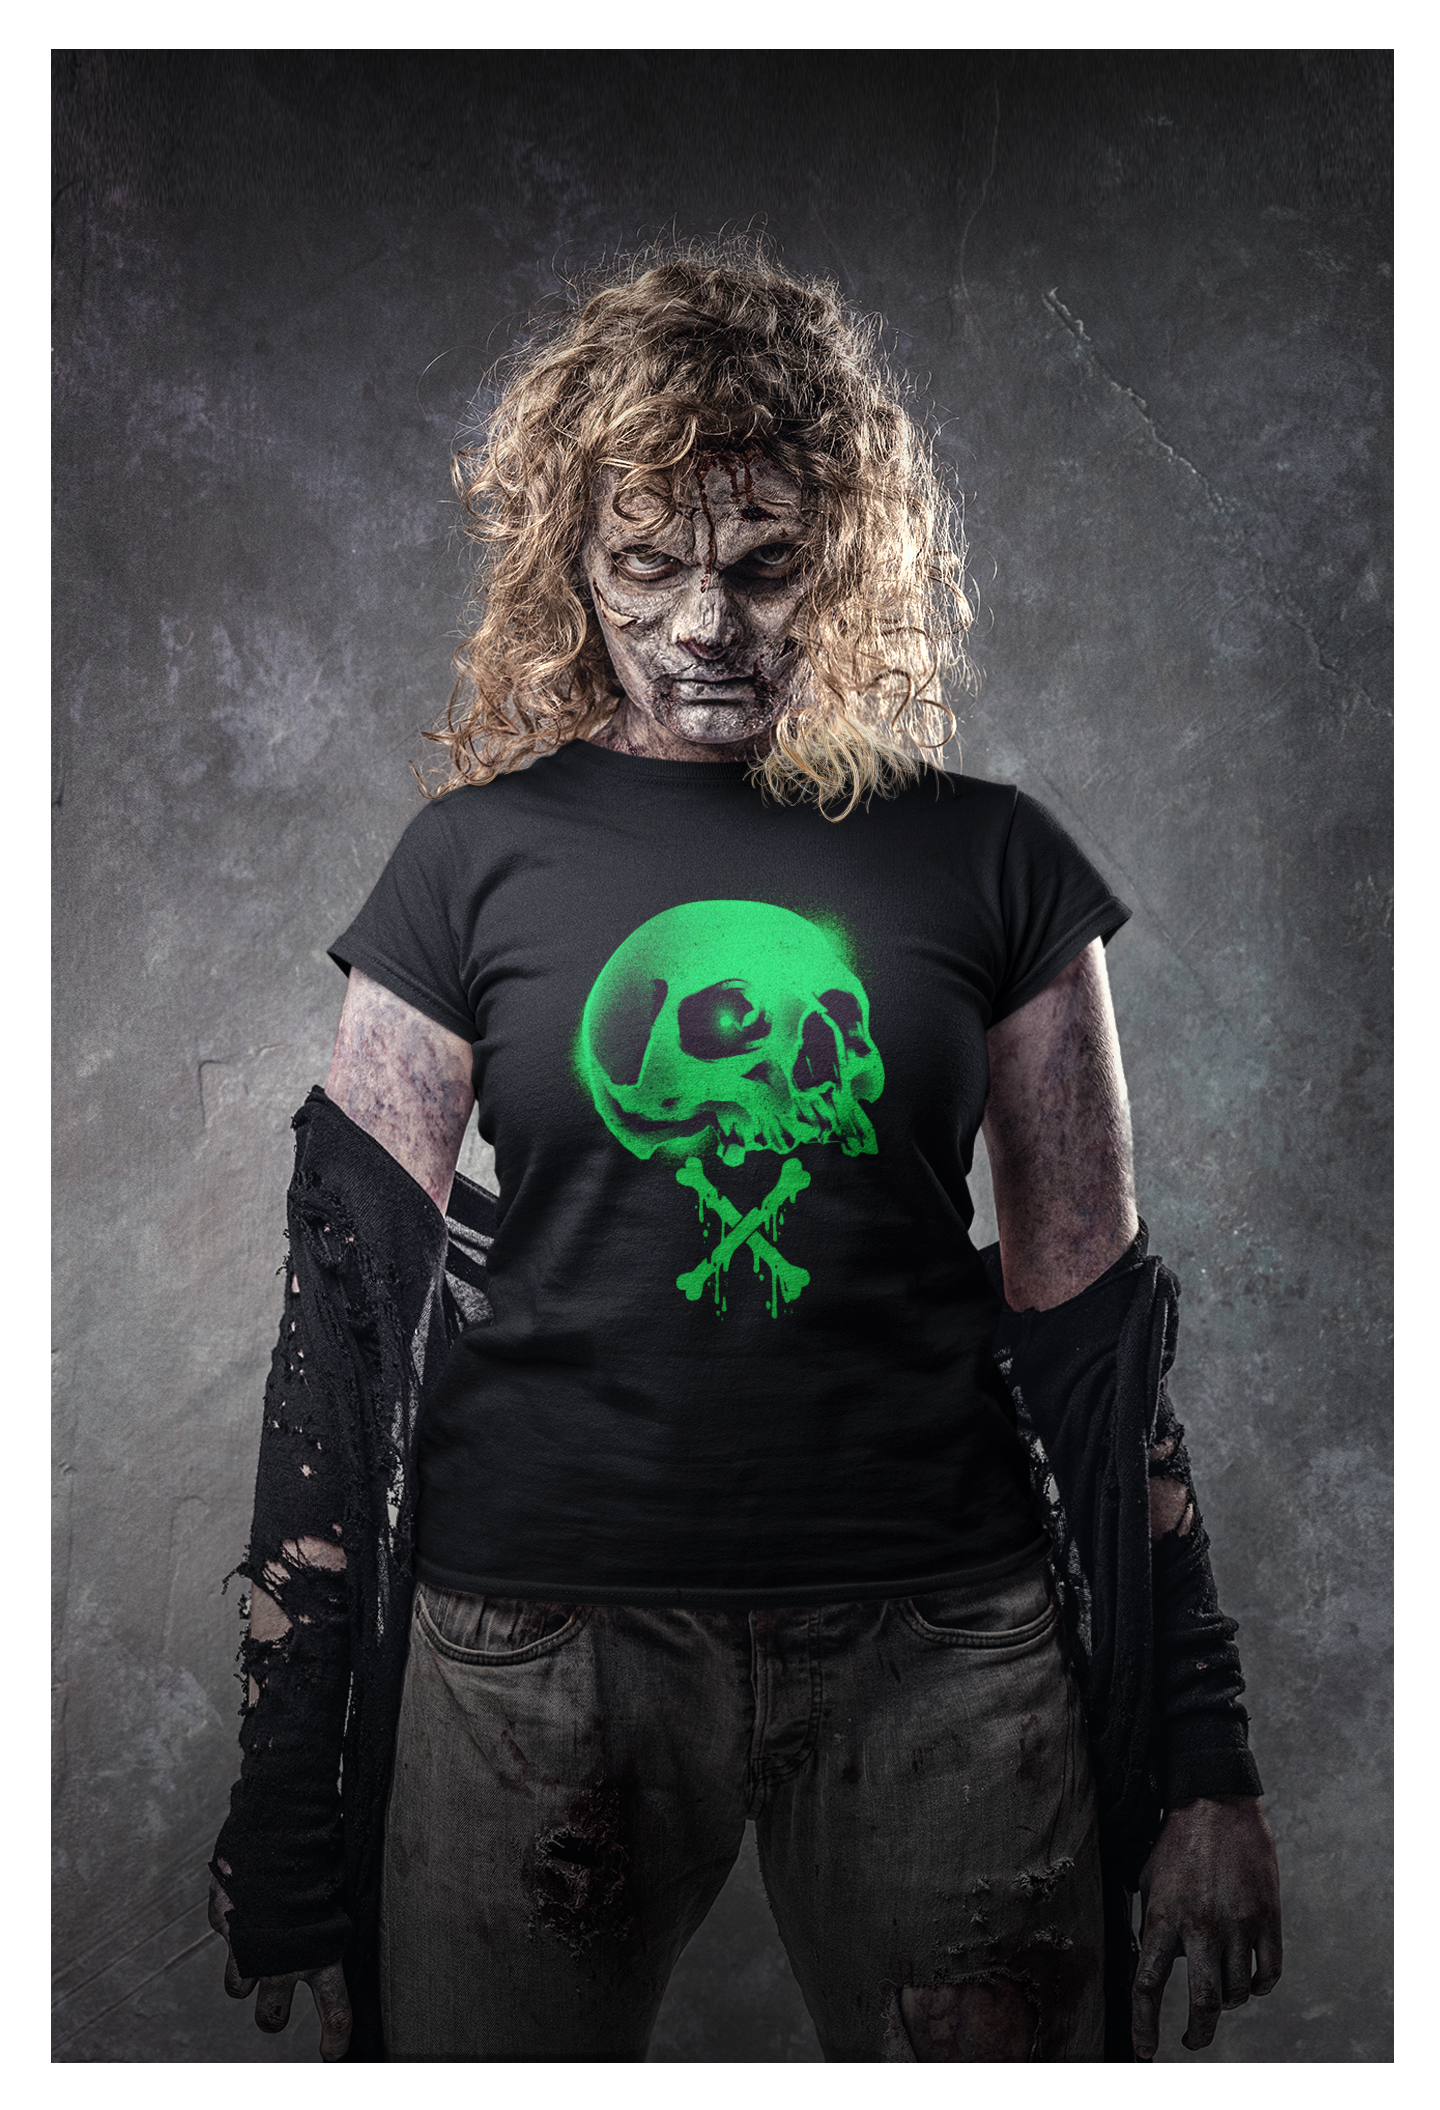 t-shirt-mockup-of-a-woman-characterized-as-a-zombie-in-a-movie-poster-style-m15879